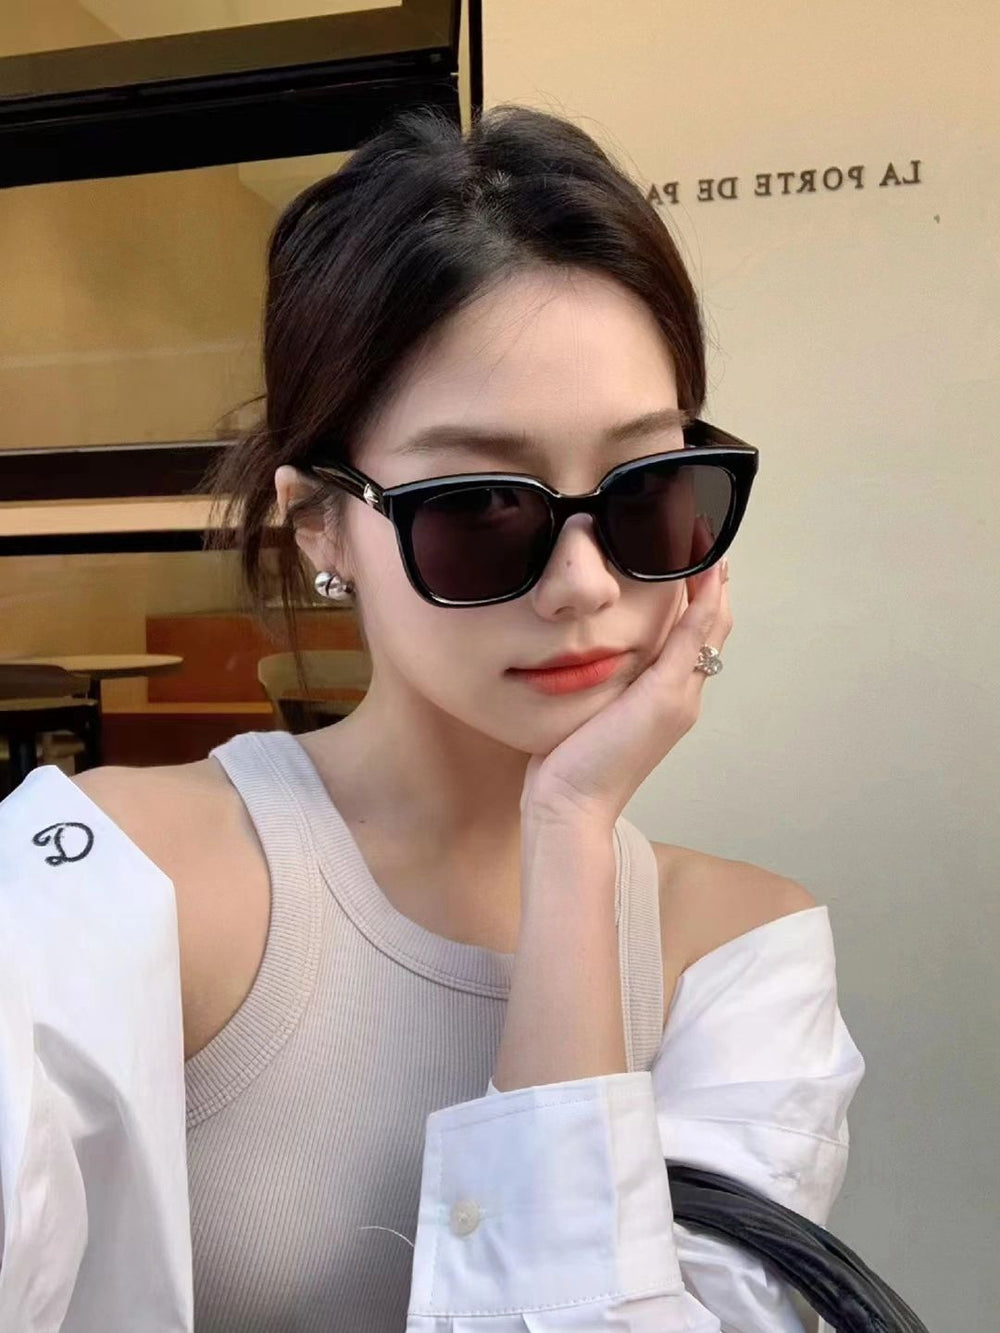 A fashionable lady sporting Korean stylish sunglasses and a pristine white shirt exudes timeless grace.